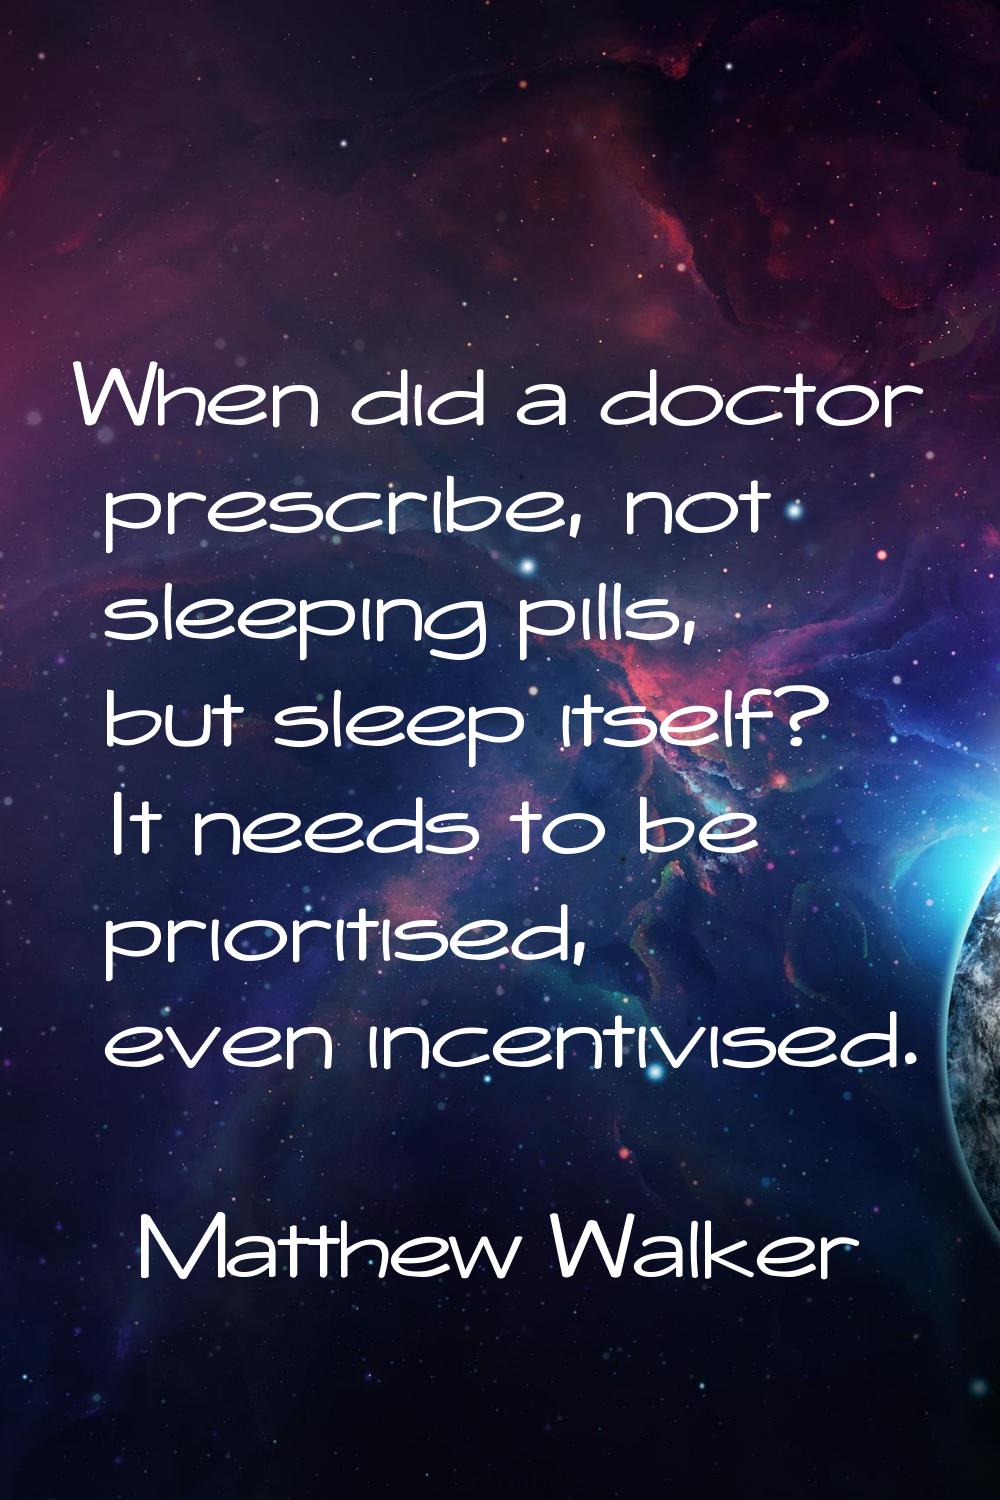 When did a doctor prescribe, not sleeping pills, but sleep itself? It needs to be prioritised, even